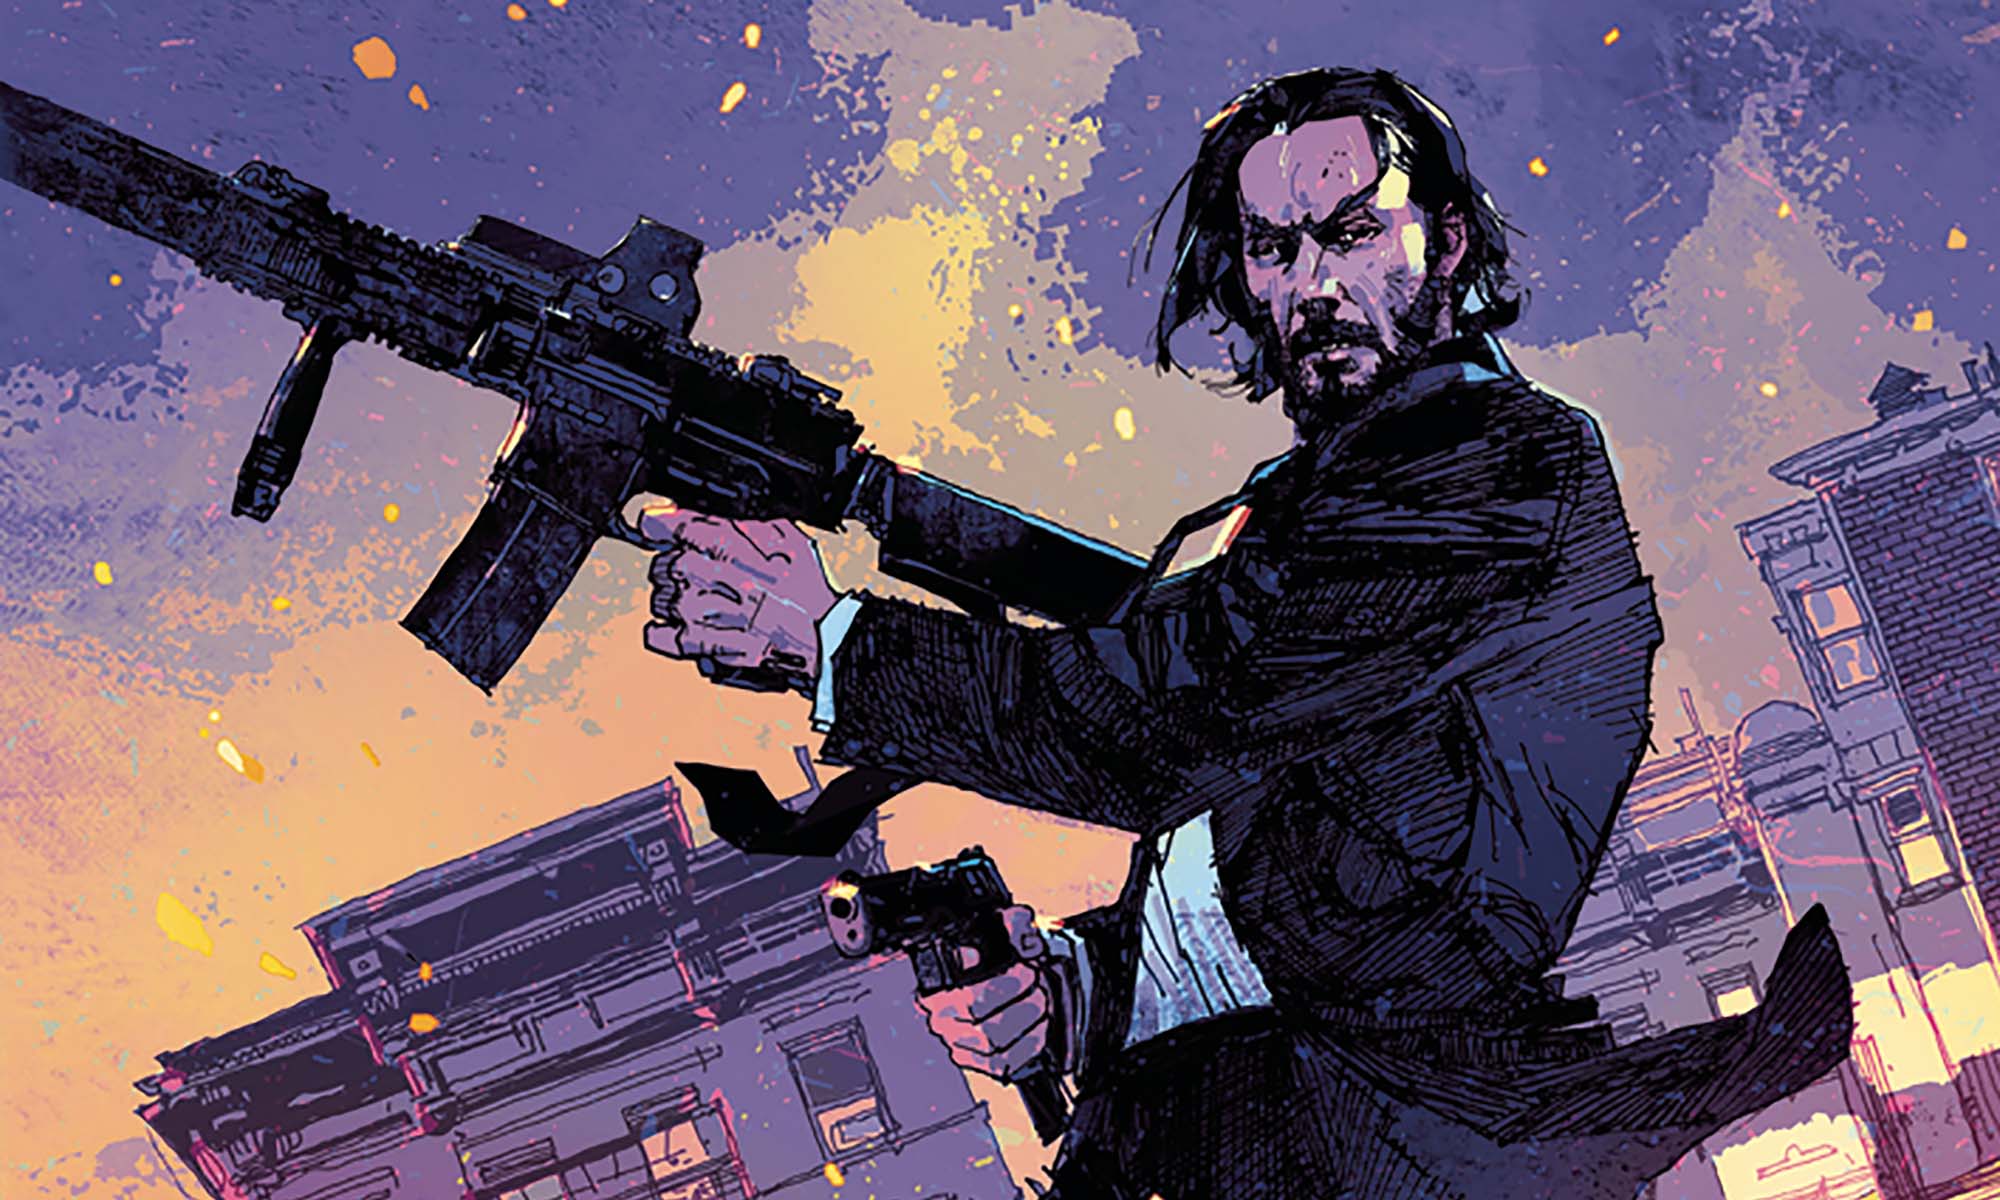 Image for Love John Wick? Here's more like it in movies, TV shows, and comics